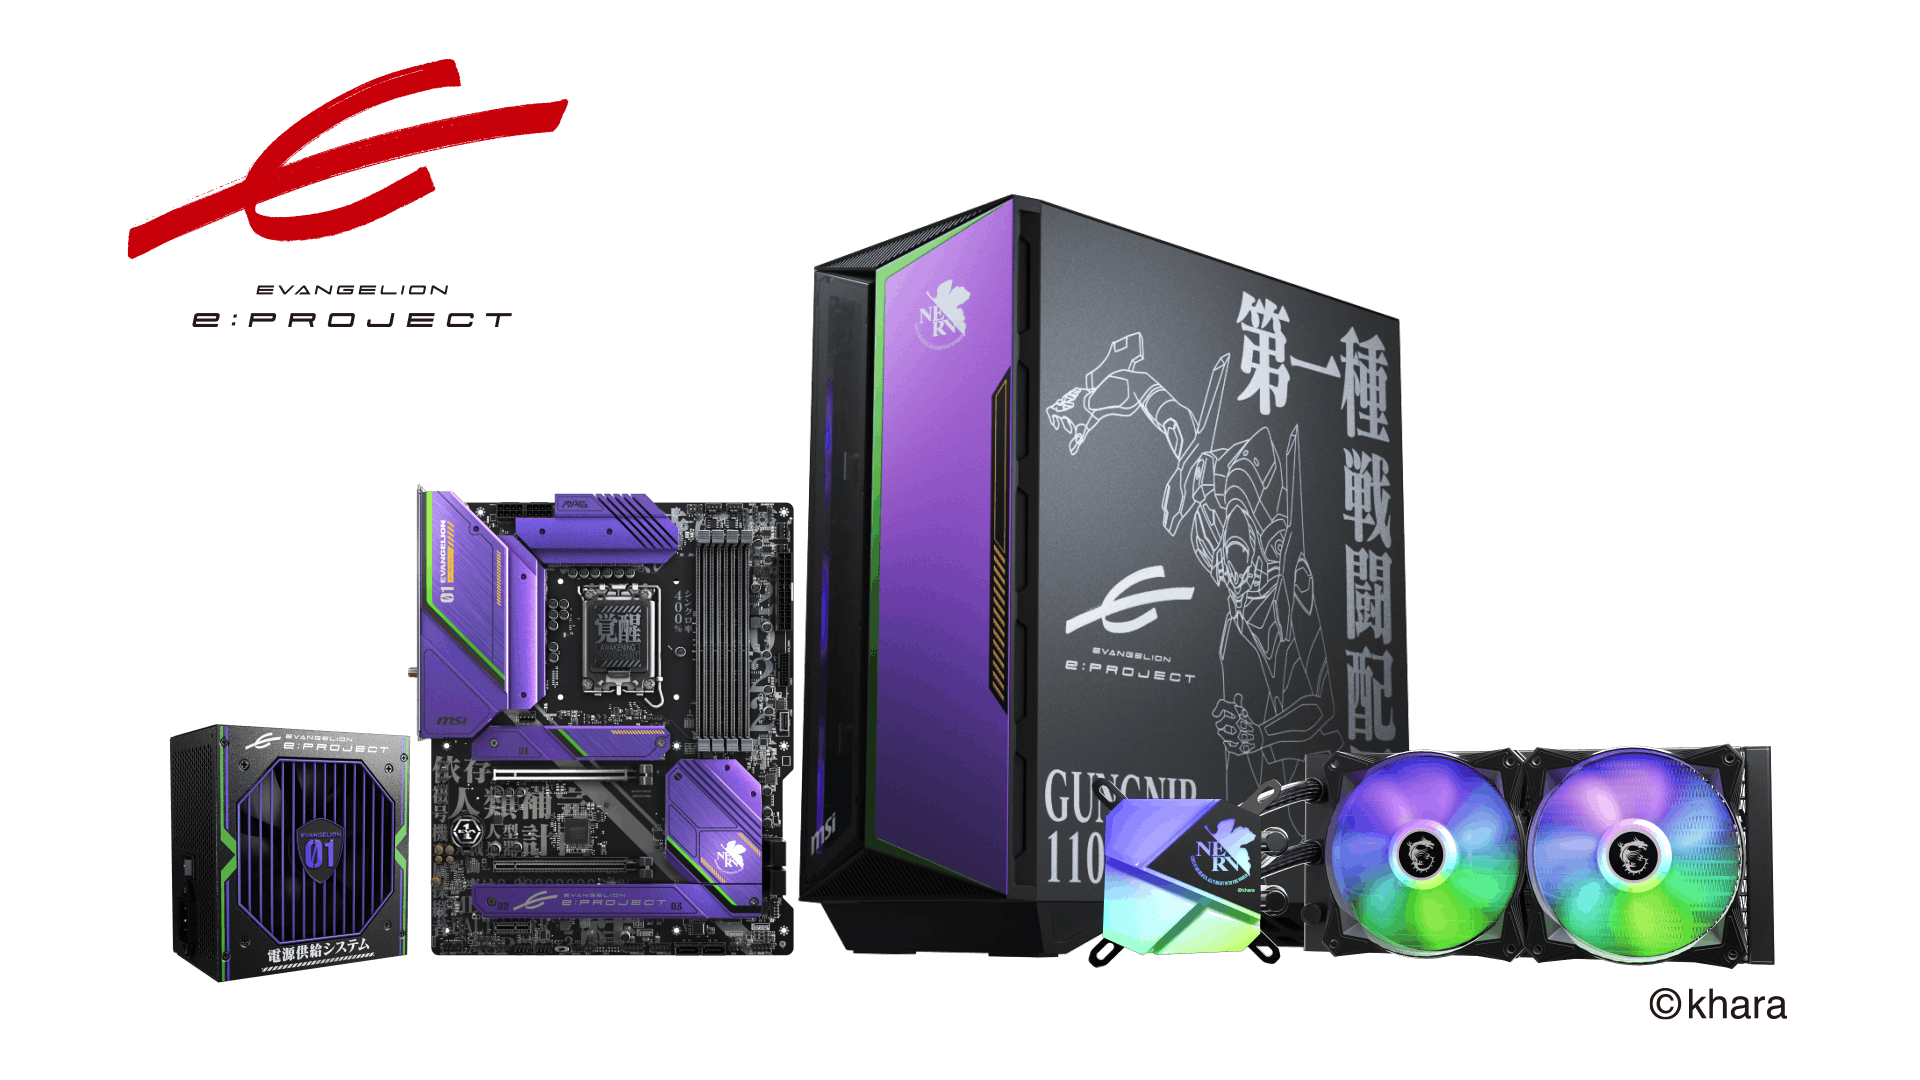 Amazon.com: ASUS TUF GT301 NEZUKO Mid-Tower Compact Case Demon Slayer  Edition for ATX Motherboards with Honeycomb Front Panel,120mmAura  Addressable RBG Fans,Headphone Hanger, and 360mm Radiator Support, 2xUSB  3.2 : Electronics